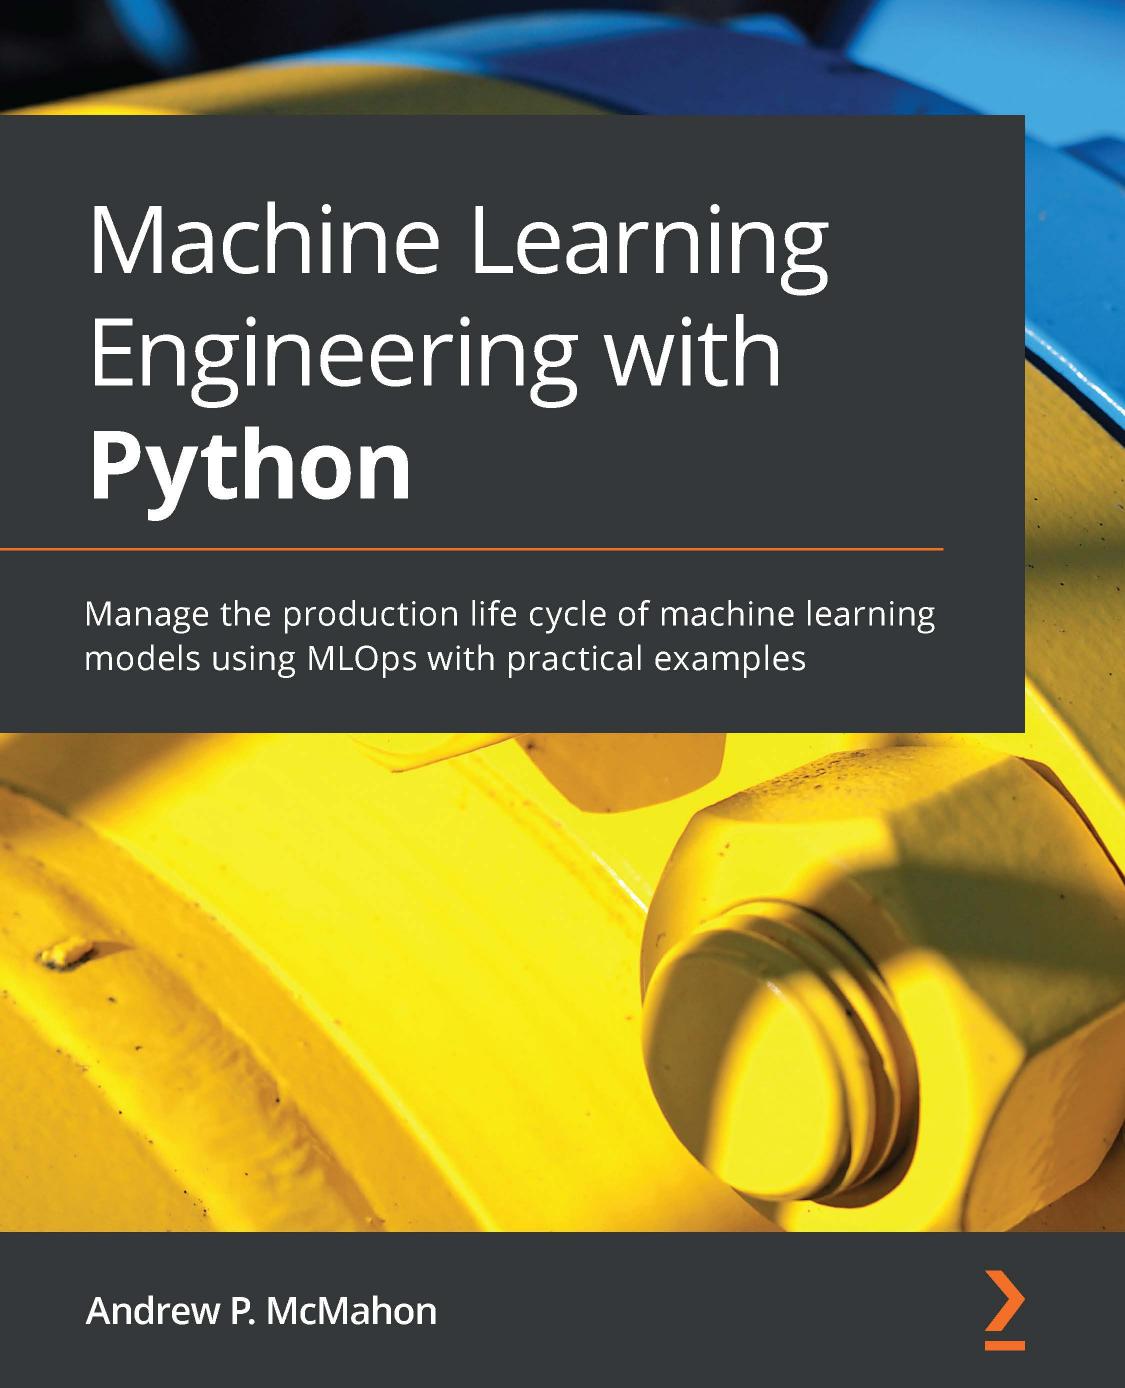 Machine Learning Engineering with Python: Manage the Production Life Cycle of Machine Learning Models using MLOps with Practical Examples